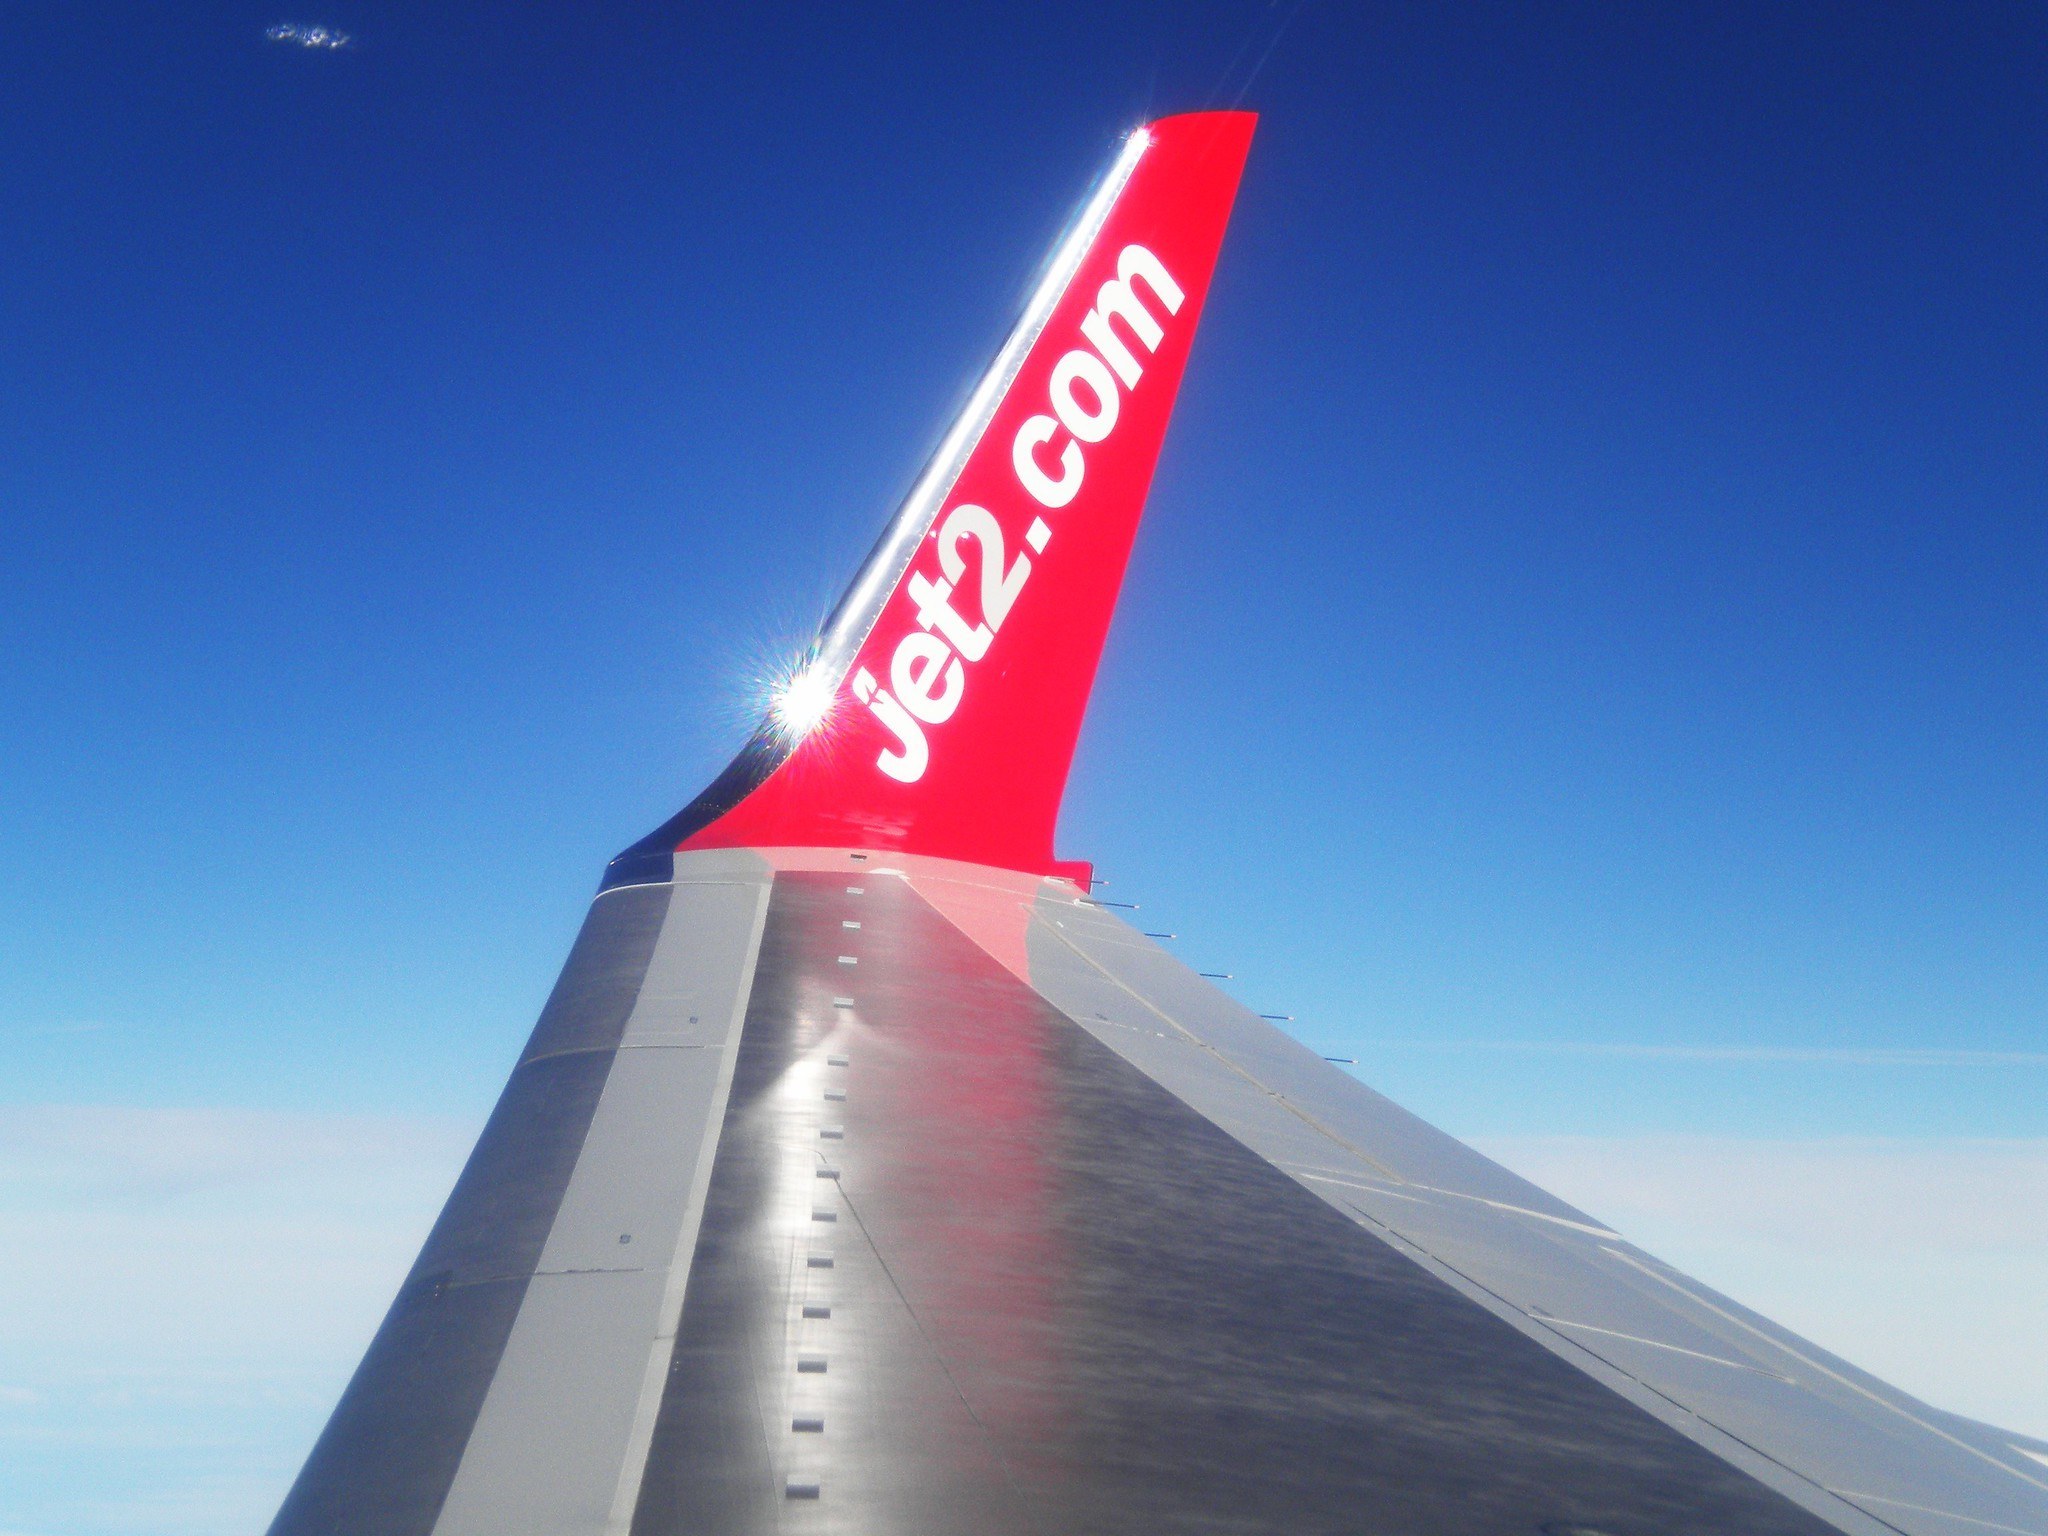 Step by Step Guide on How to Change Flights or Get Refunds on Jet2.com